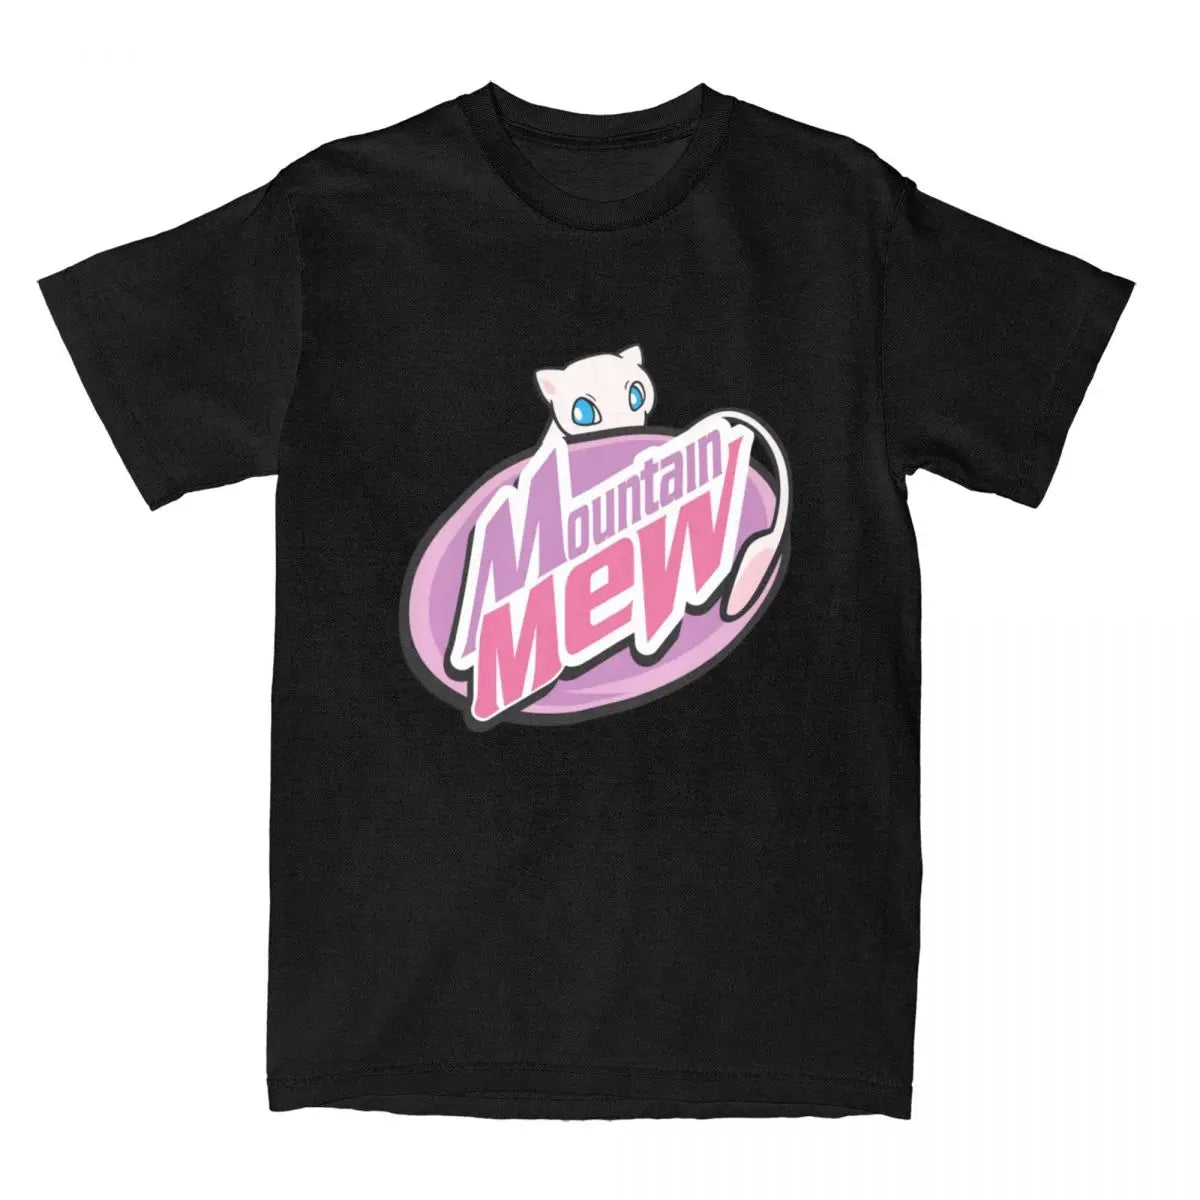 Catch em all with our new Mystic Mew Cotton Tee | Here at Everythinganimee we have the worlds best anime merch | Free Global Shipping